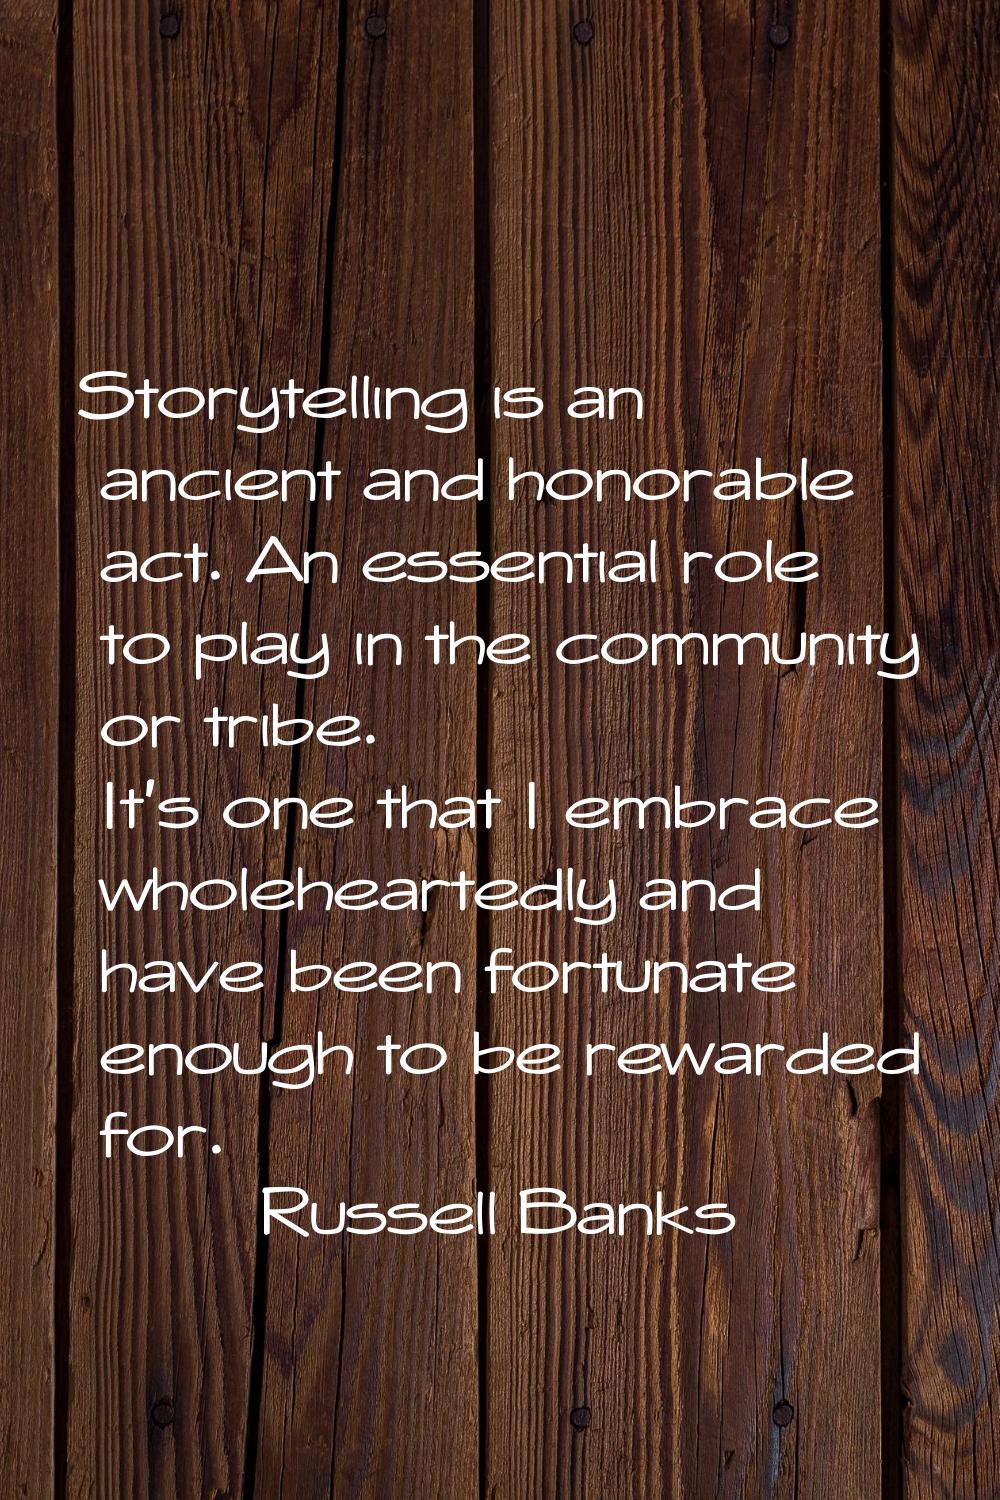 Storytelling is an ancient and honorable act. An essential role to play in the community or tribe. 